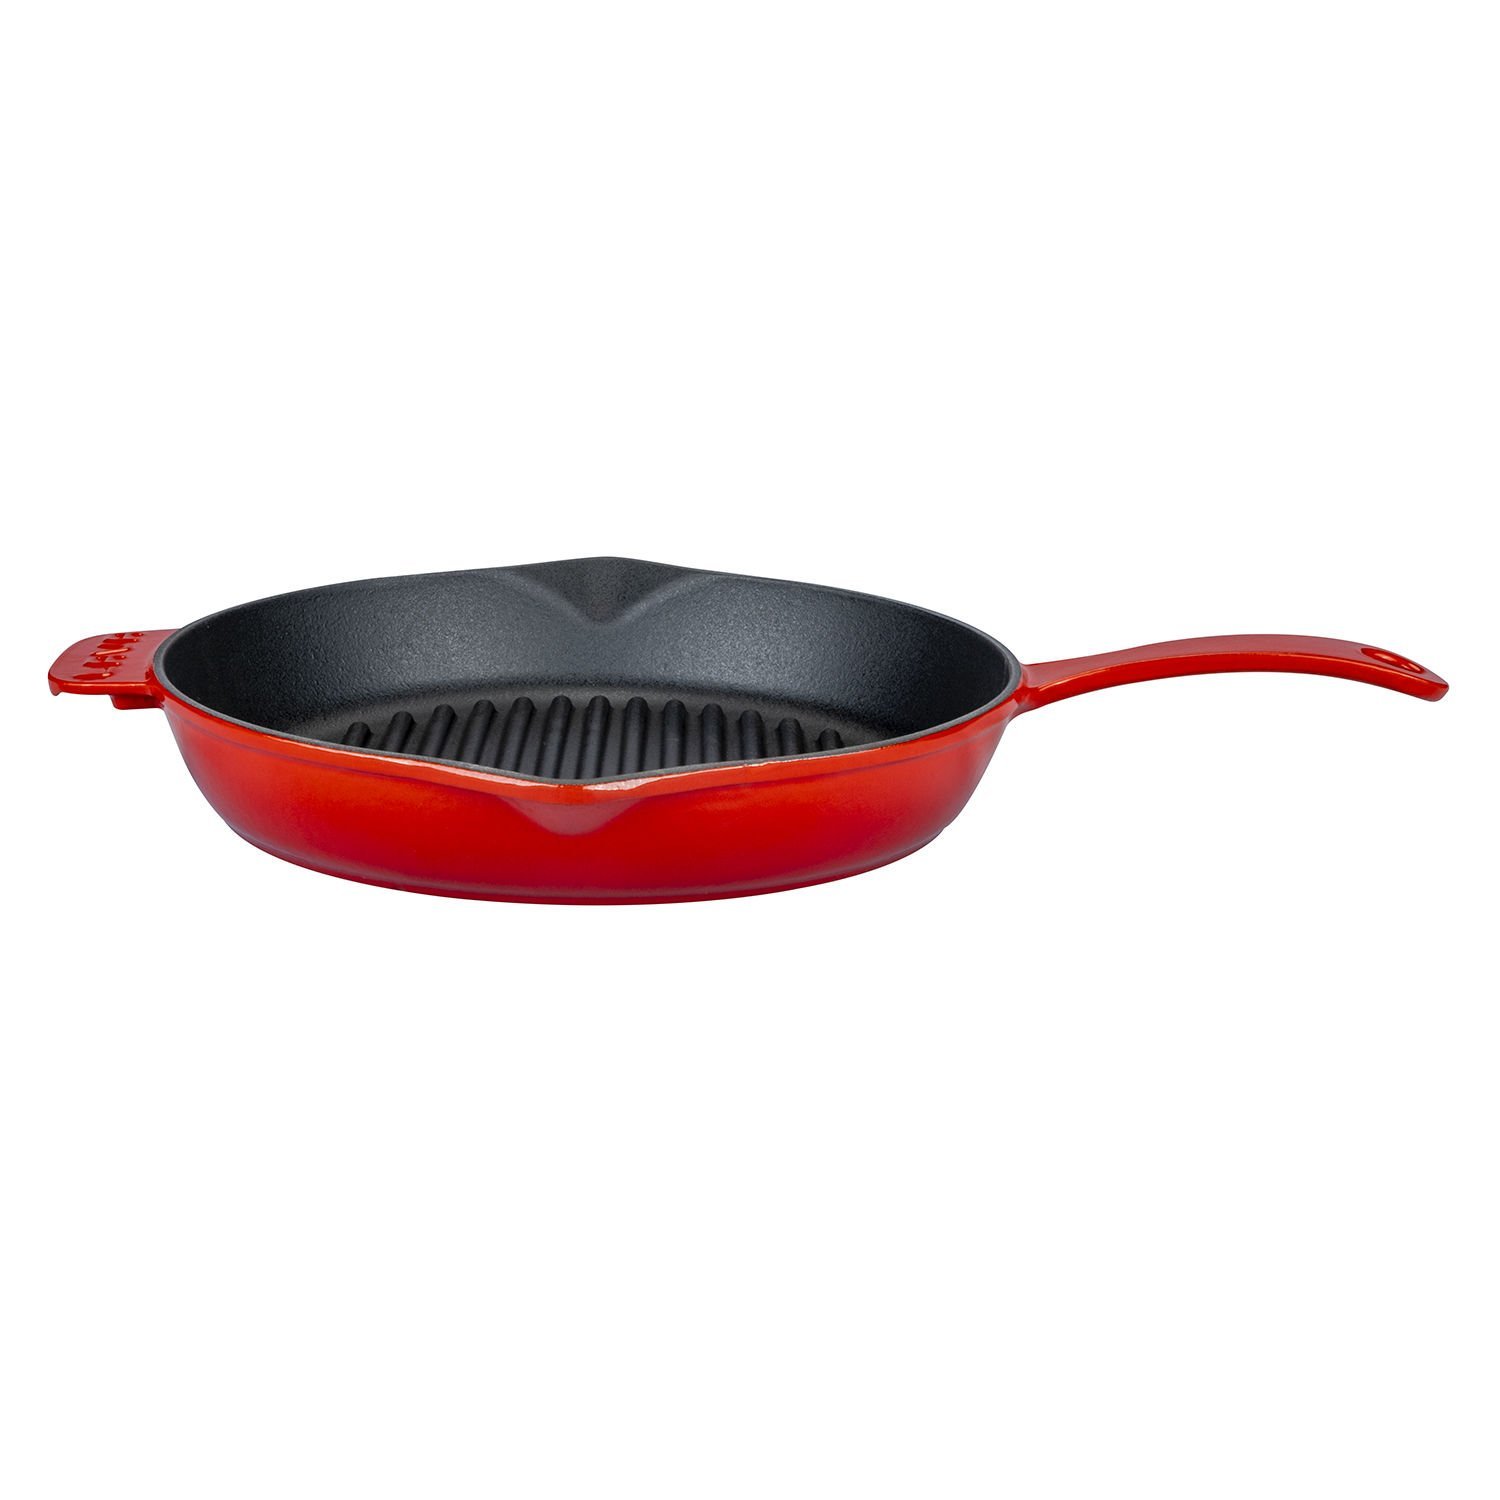 Lava Cast Round Grill Pan Diameter (Ø)28cm. Cast Iron Solid Handle - Red Spoon Gift